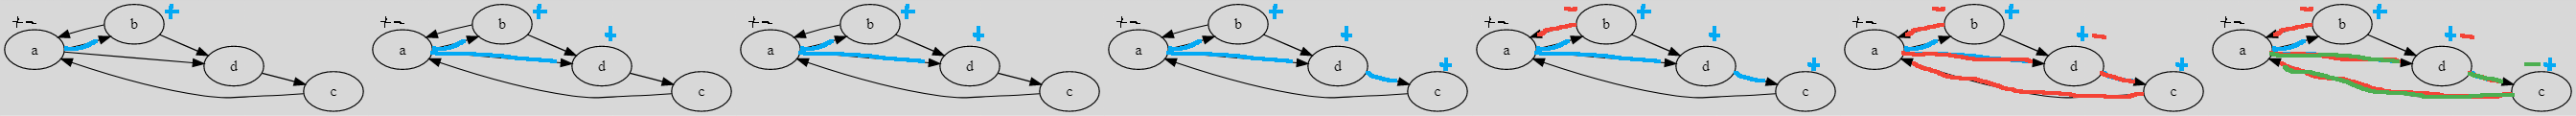 Example 1 - super-connected algorithm